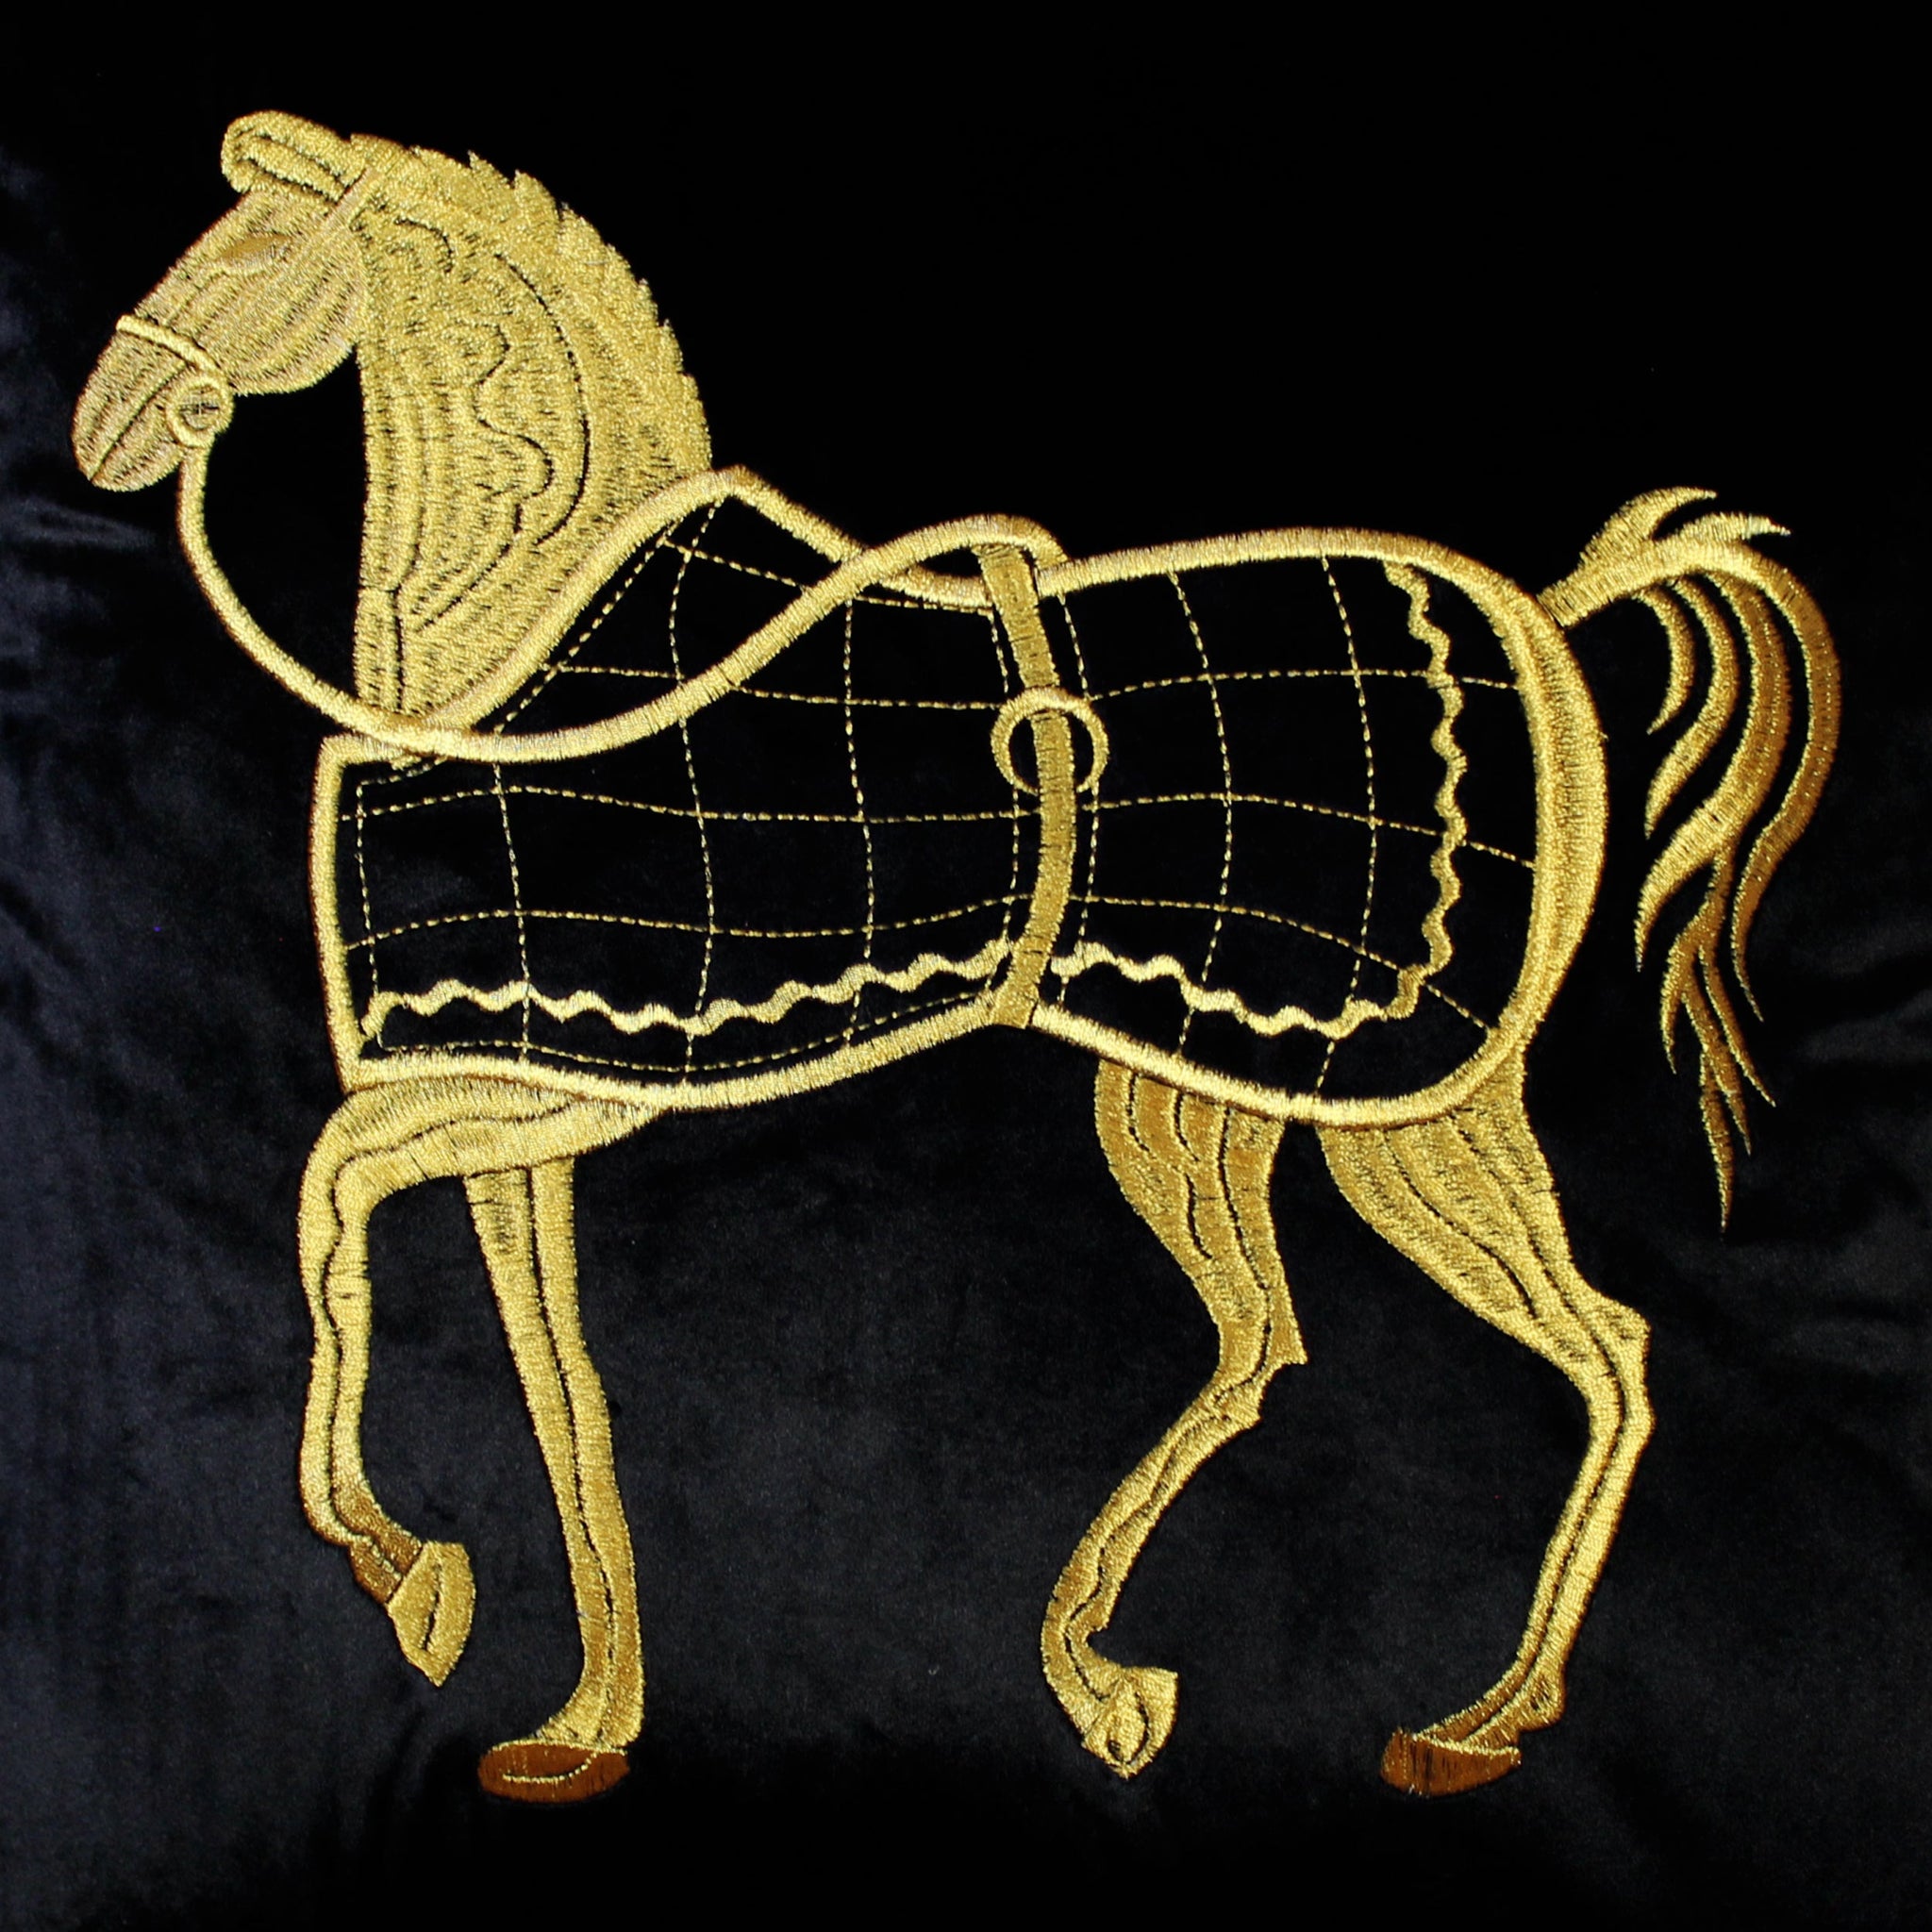 Black Cushion Cover Velvet Decorative Pillow Cover Classic Horse Embroidery Home Decor Style Throw Pillow for Sofa Chair Bedroom Living Room 45x45 cm (18x18 Inches).